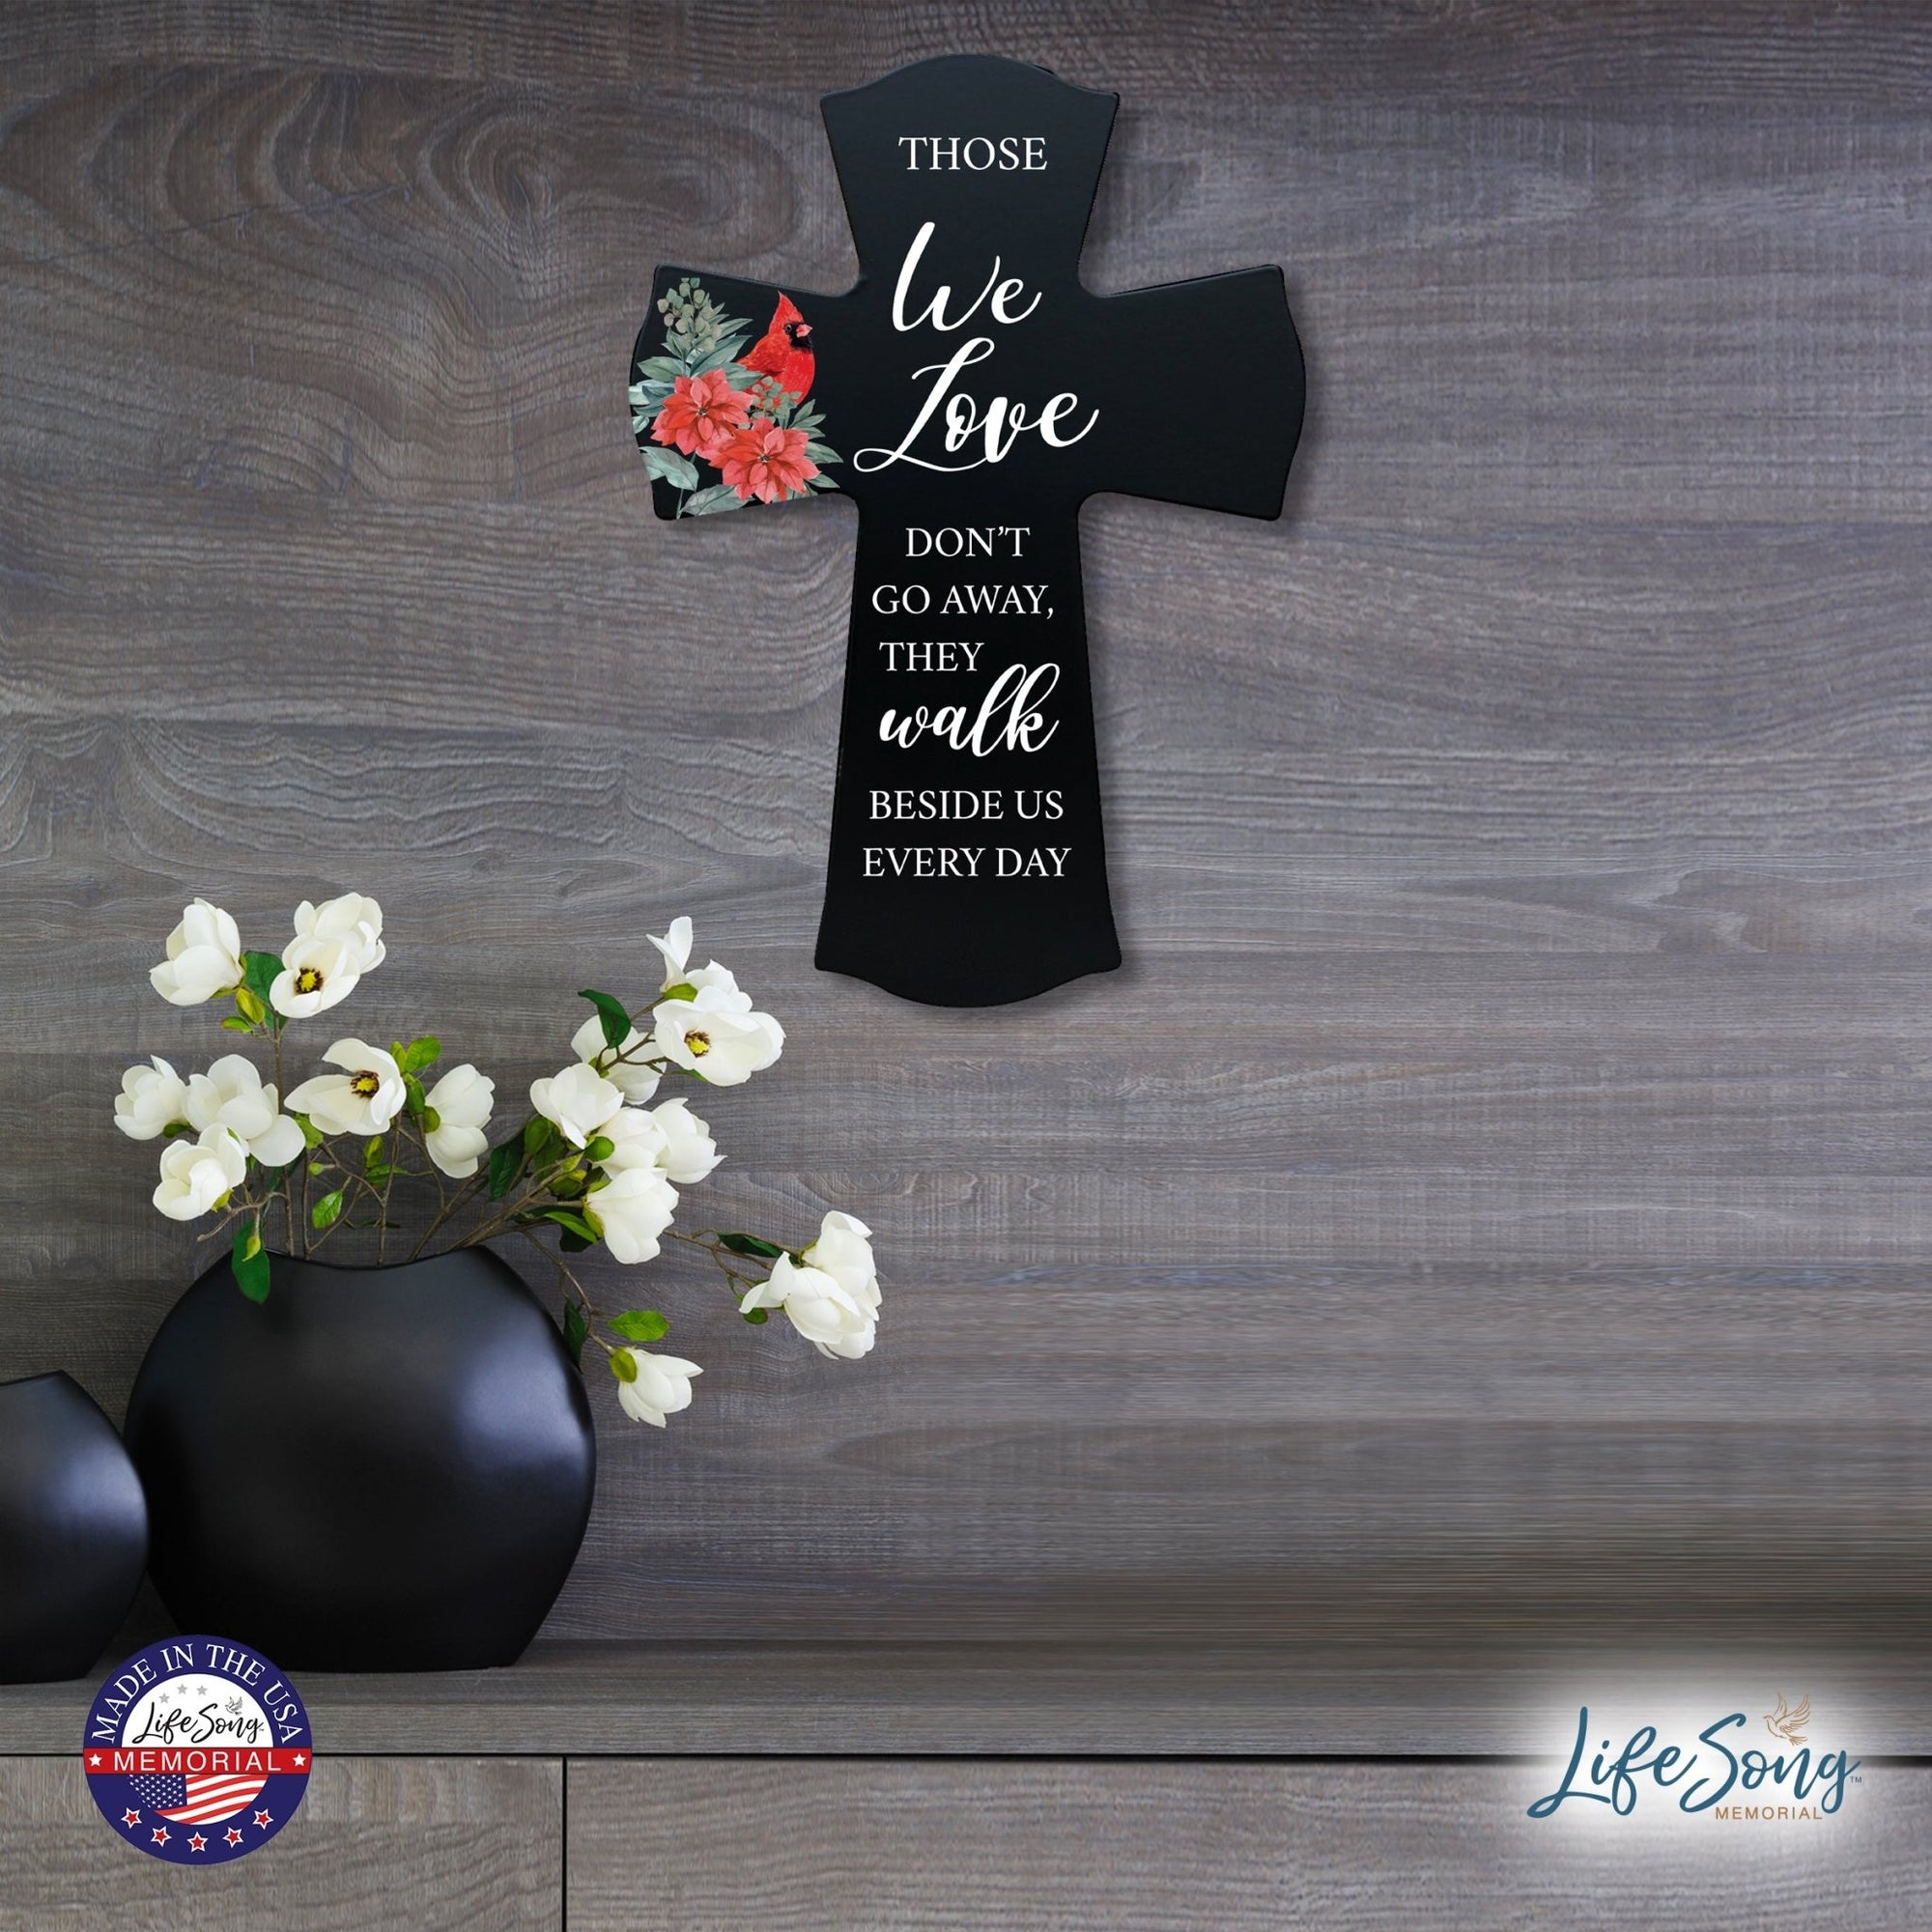 Memorial Wooden Wall Cross 8x11 Cardinal Bereavement Gift for Loss on Loved One – Those We Love - LifeSong Milestones